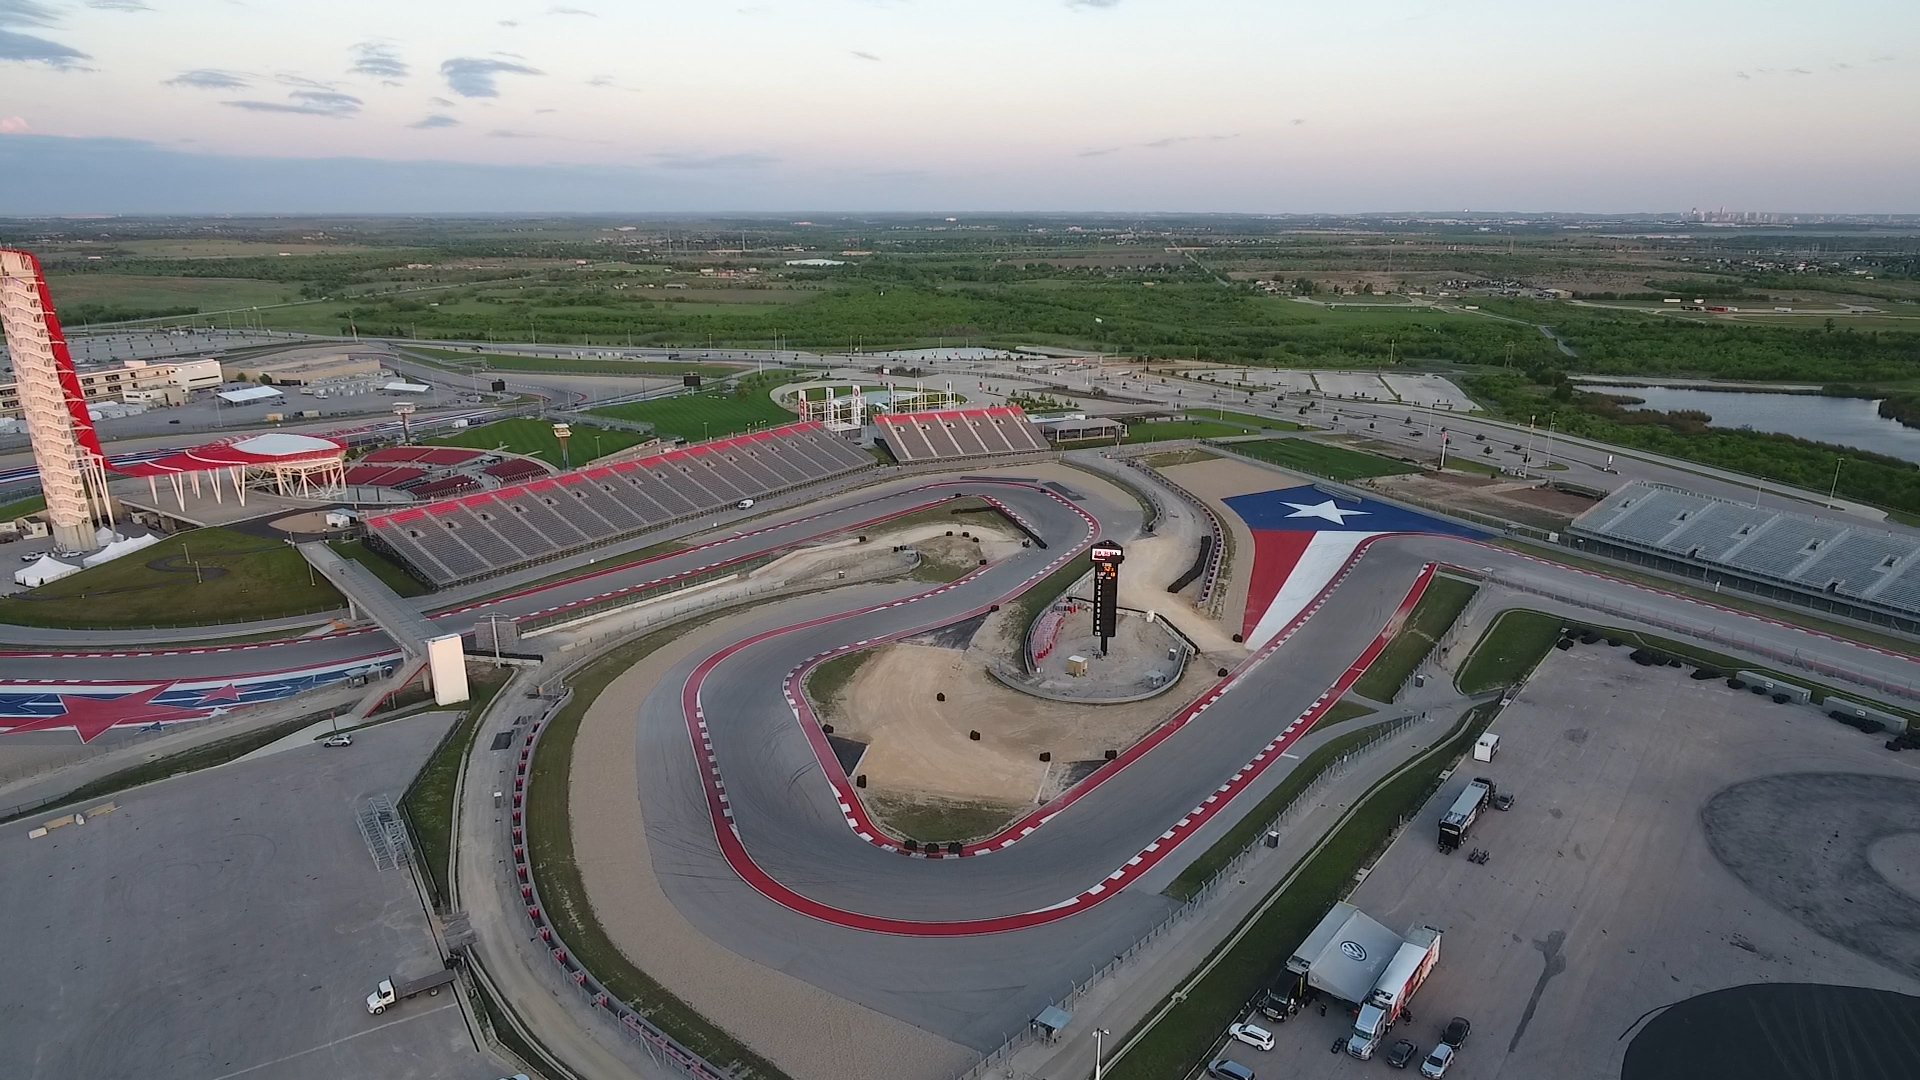 The FIA World Rallycross Championship comes to the States at COTA